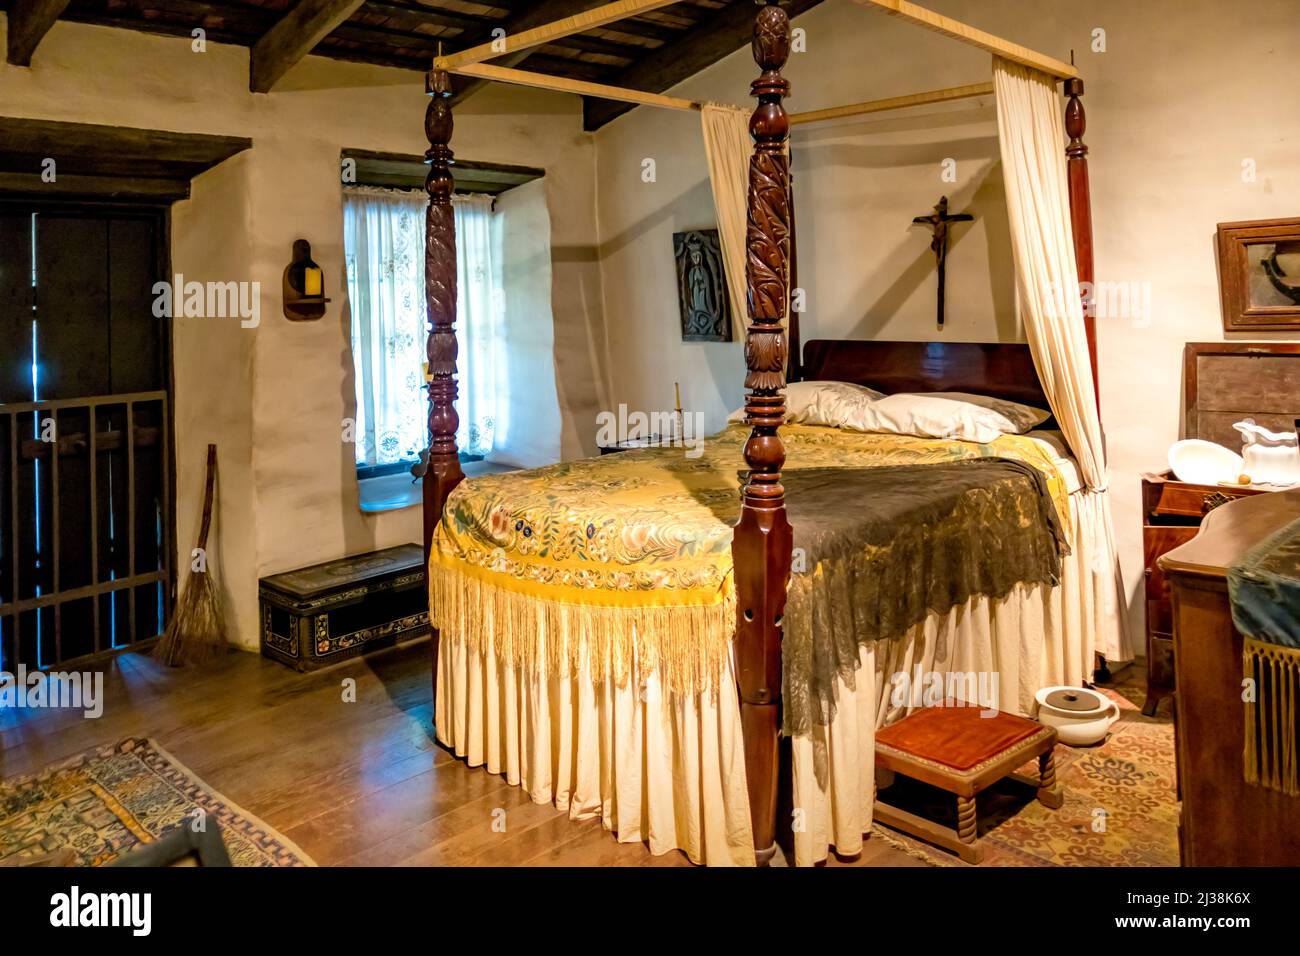 The interior of the Avila Adobe, the oldest House (1818) in the Olvera Street district, old town Los Angeles, California, USA. Stock Photo